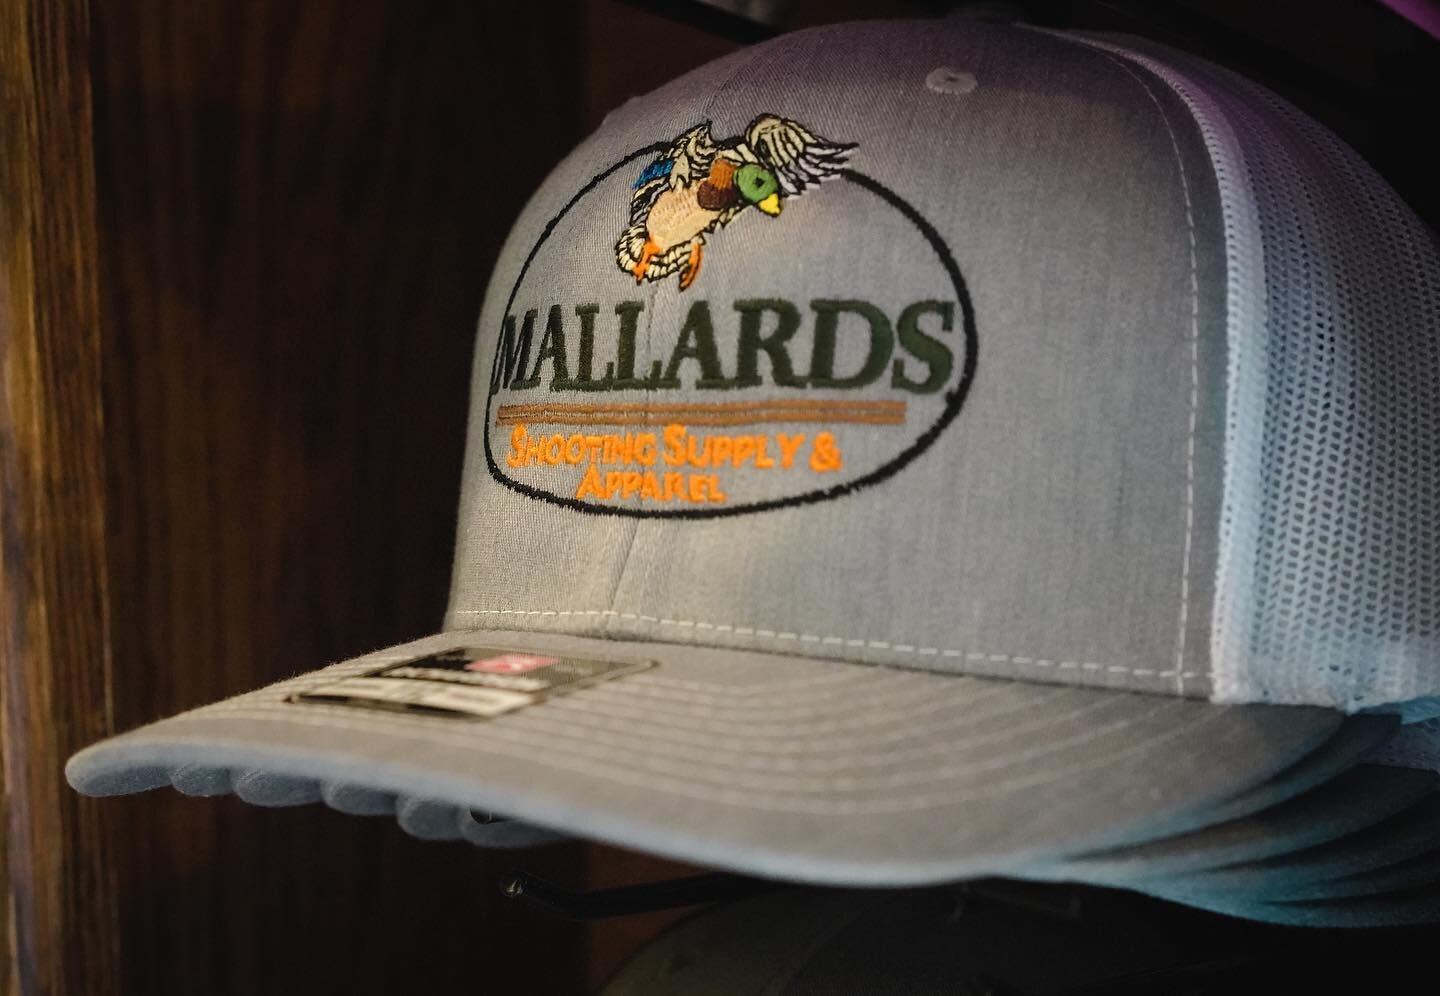 Show your love for the shop and rock your Mallards swag this week ⠀
⠀
⠀
⠀
⠀
⠀
⠀
#glock #sigsauer #smithandwesson #beretta #ruger #walther #springfield #remington #fnherstal #browing #firearms #2A #2ndamendment #usa #hk #mossberg #coltdefense #barrett